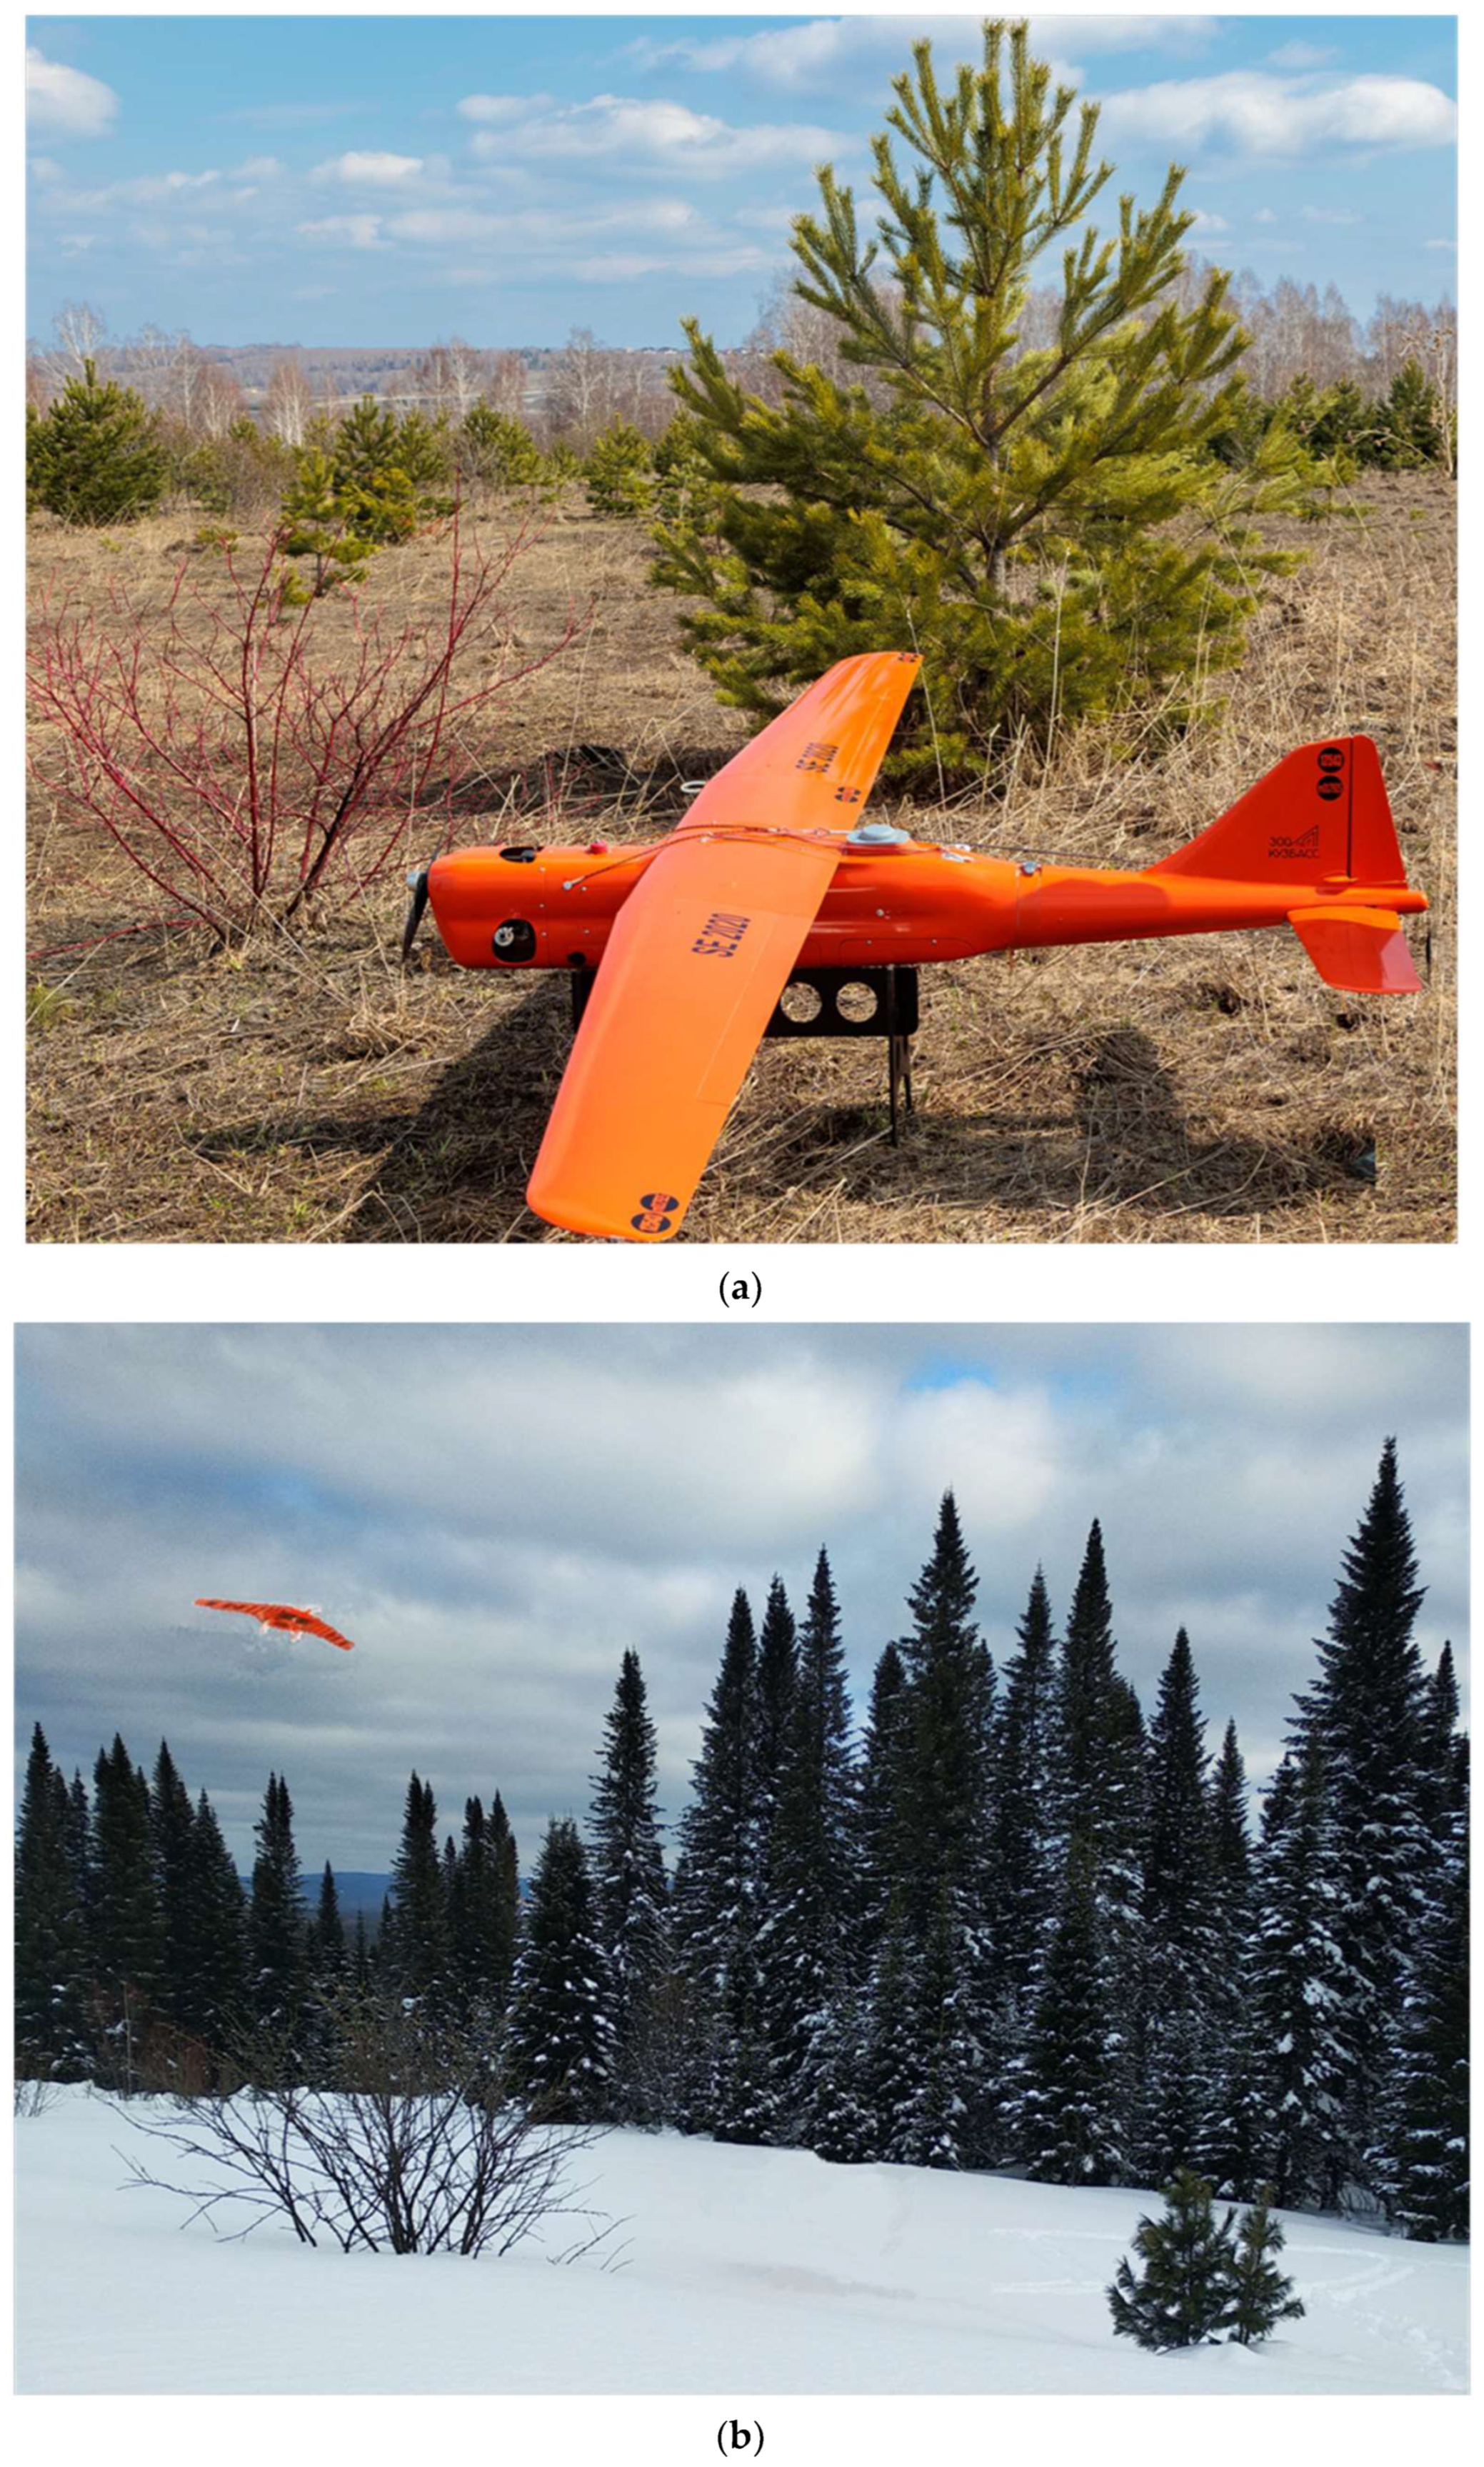 Fire | Free Full-Text | A Survey on Monitoring of Wild Animals during Fires  Using Drones